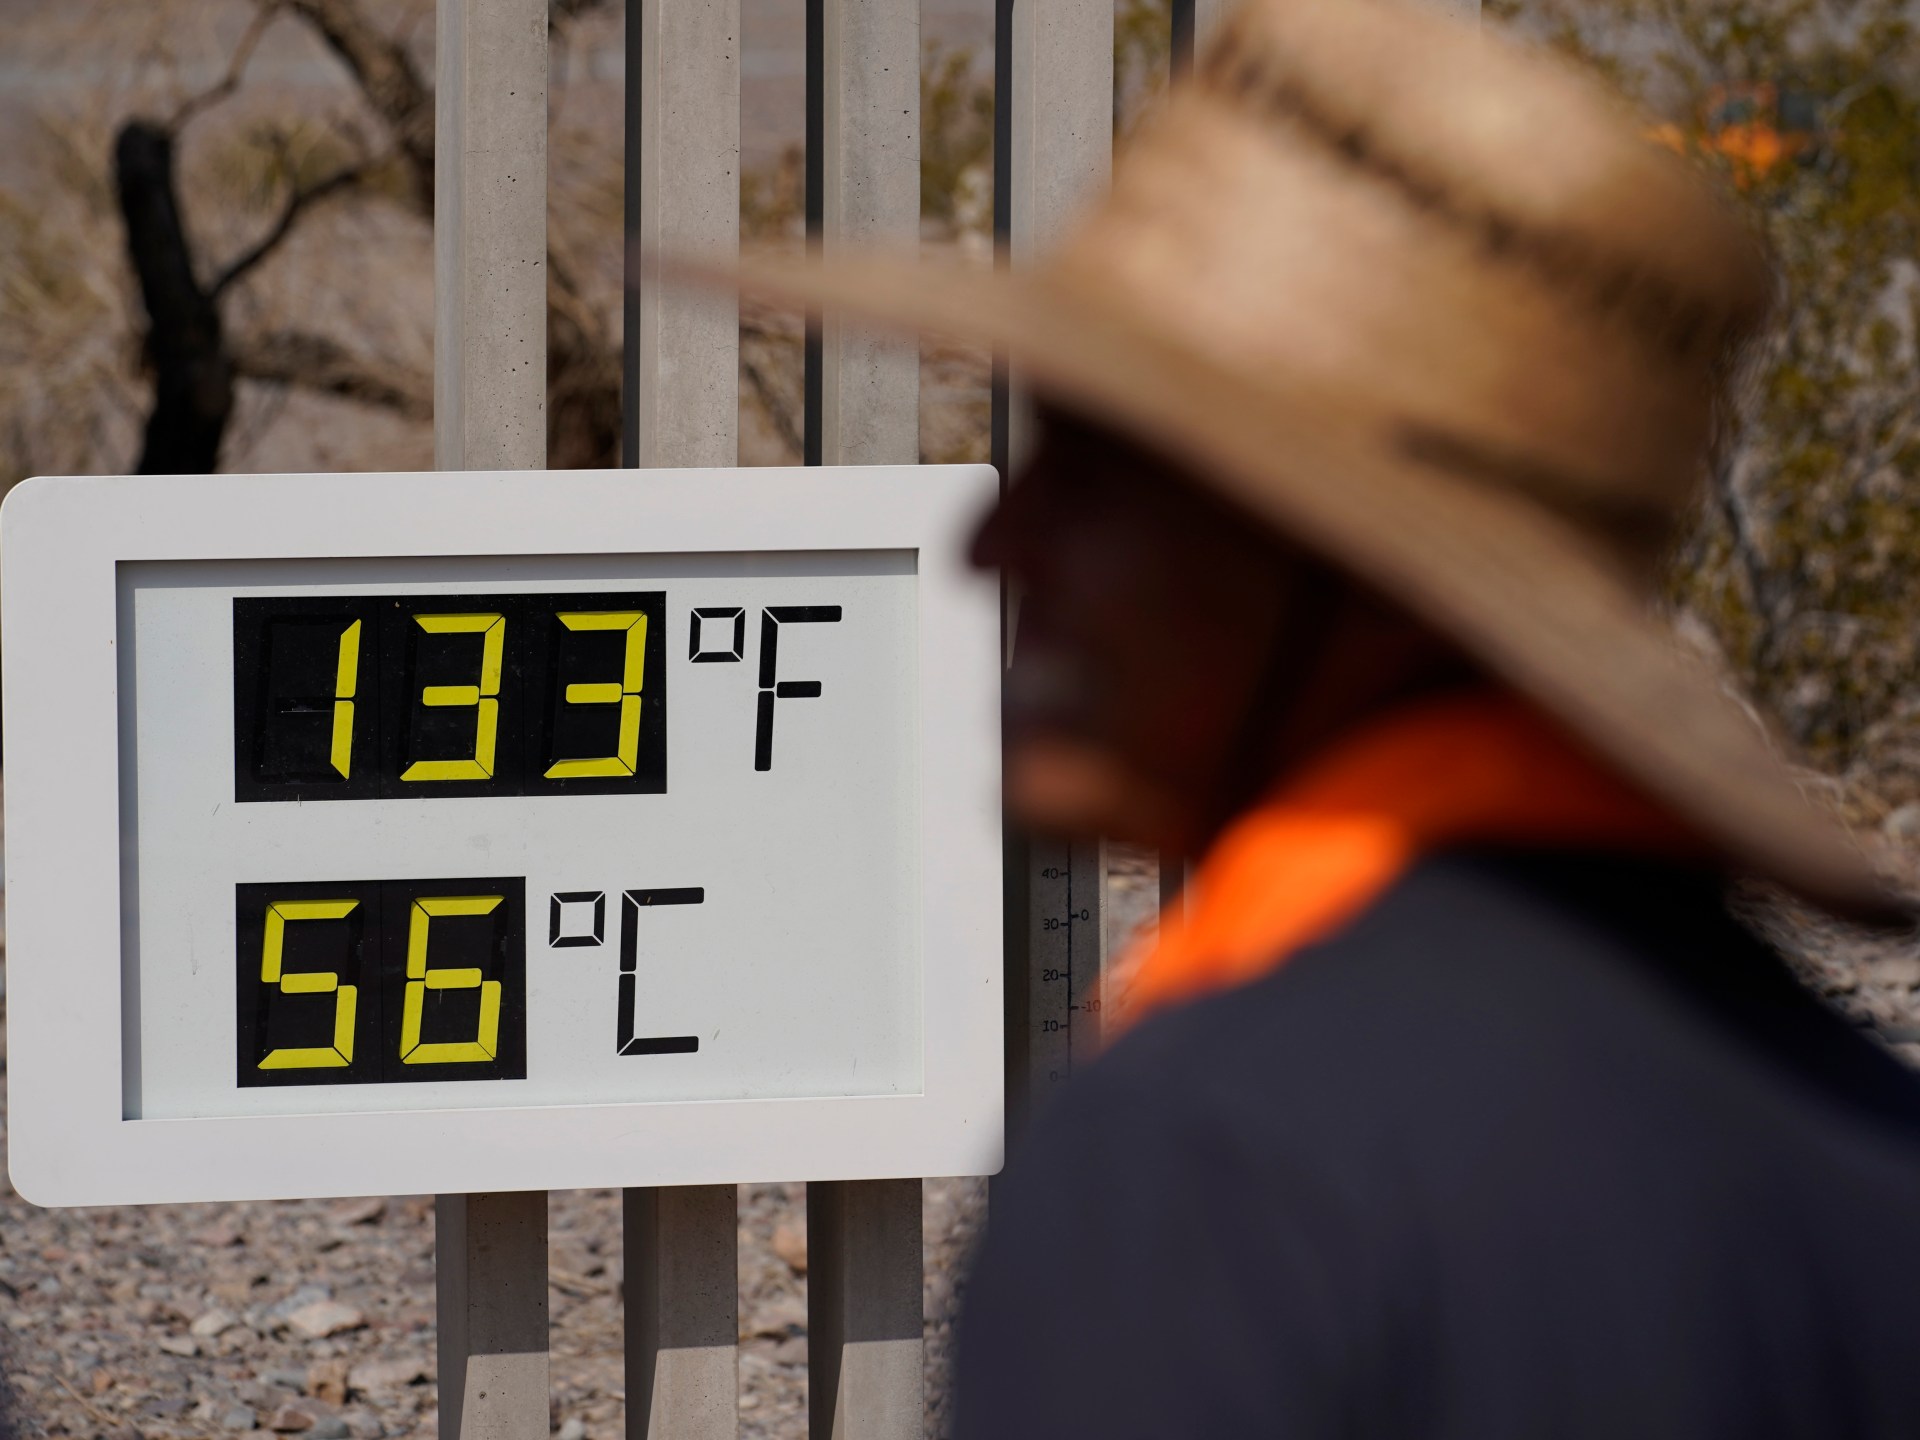 2023 declared hottest year on record as UN slams climate inaction | Climate Crisis News #declared #hottest #year #record #slams #climate #inaction #Climate #Crisis #News